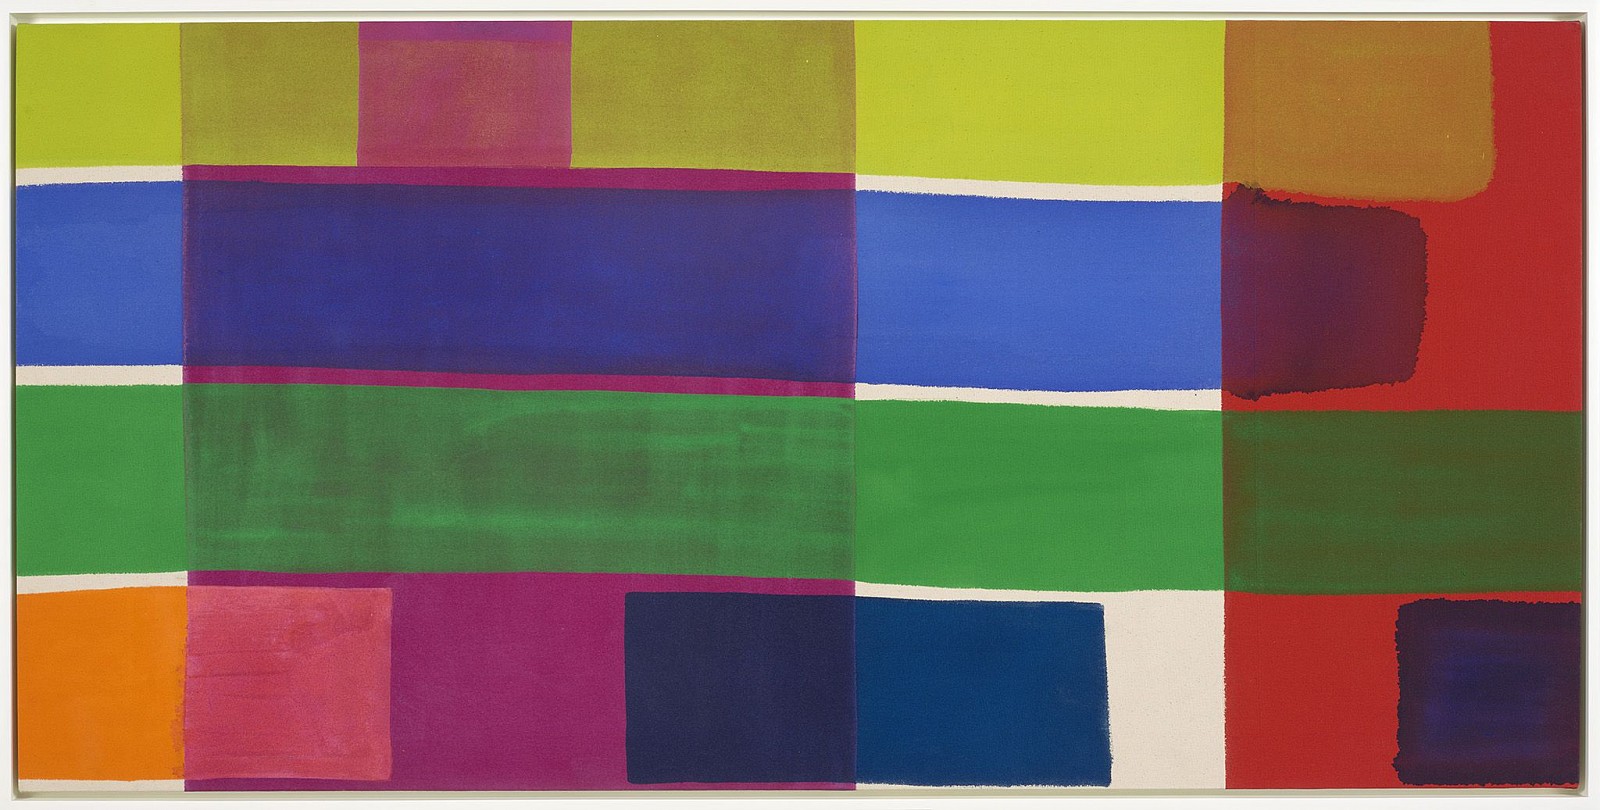 Yvonne Thomas, Complexed Squares, 1964
Acrylic on canvas, 44 5/8 x 91 3/8 in. (113.3 x 232.1 cm)
THO-00162